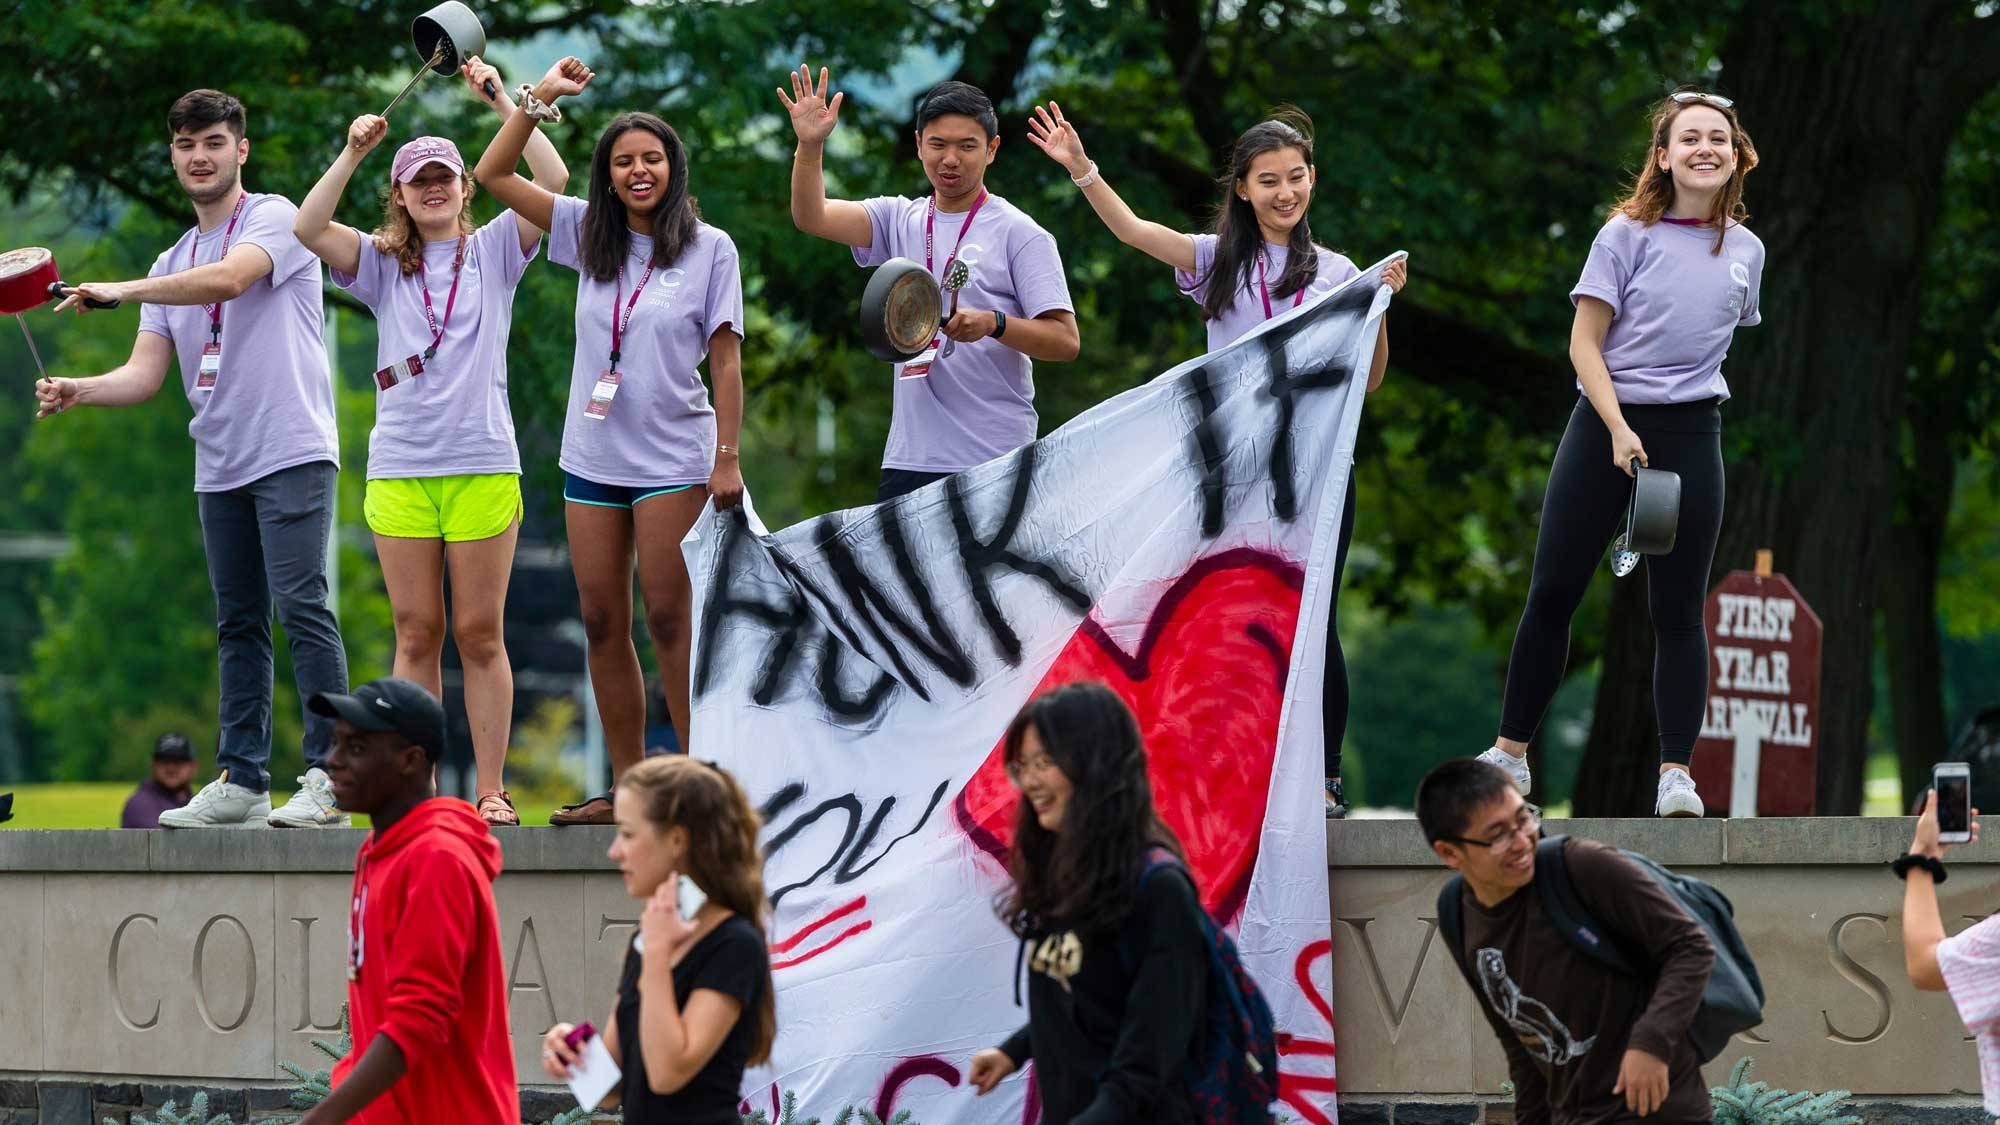 Students hold sign reading "Honk if you love Colgate"